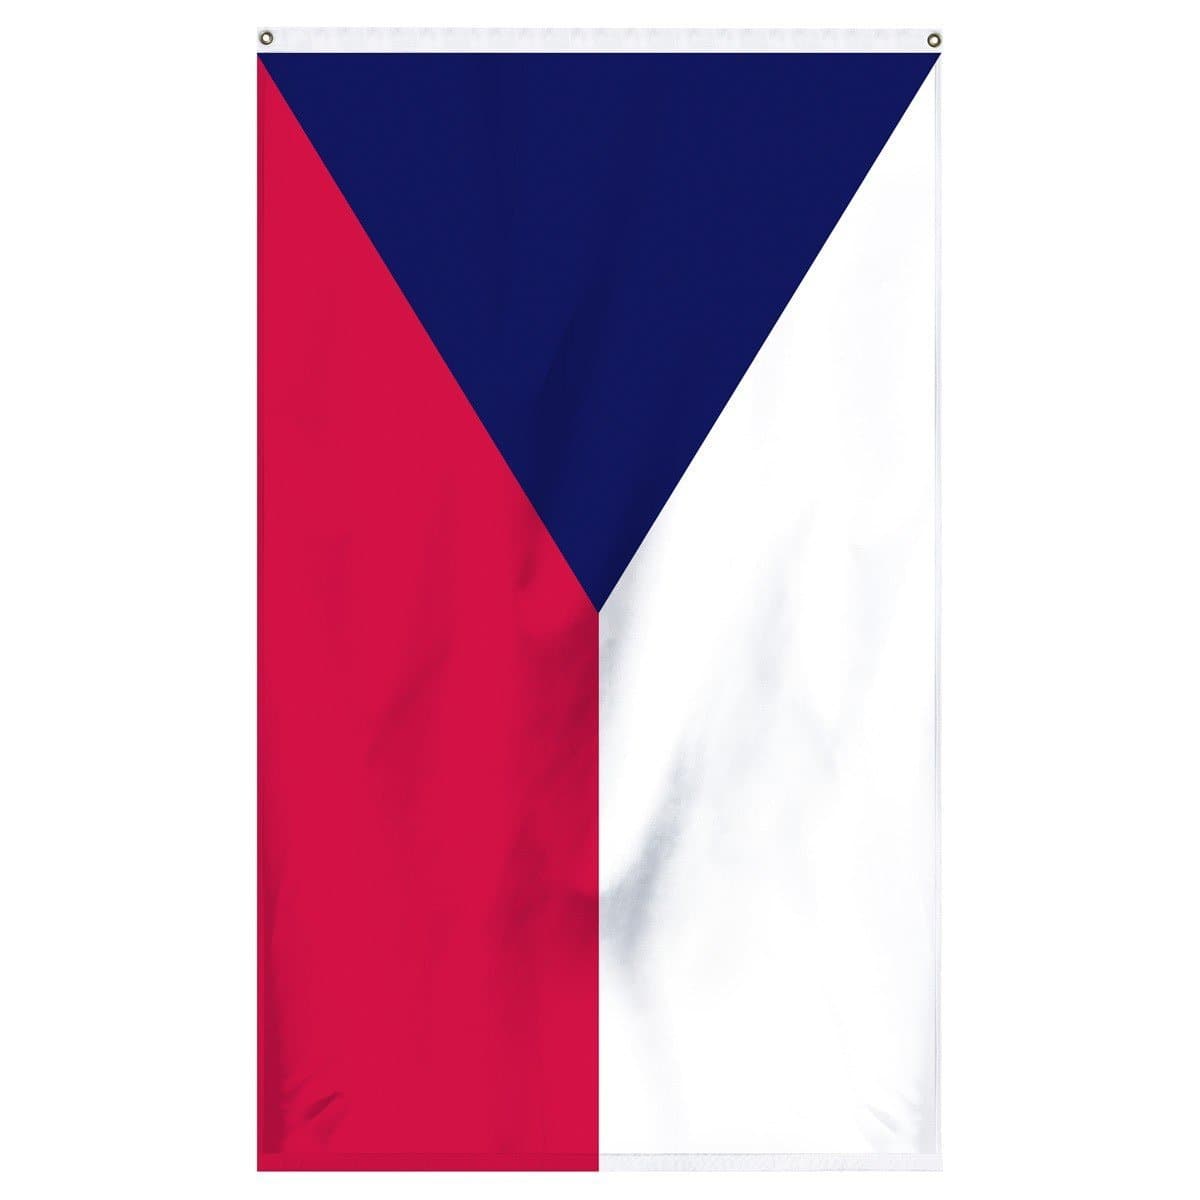 The national flag of the Czech Republic for sale for collectors and outdoor flagpoles